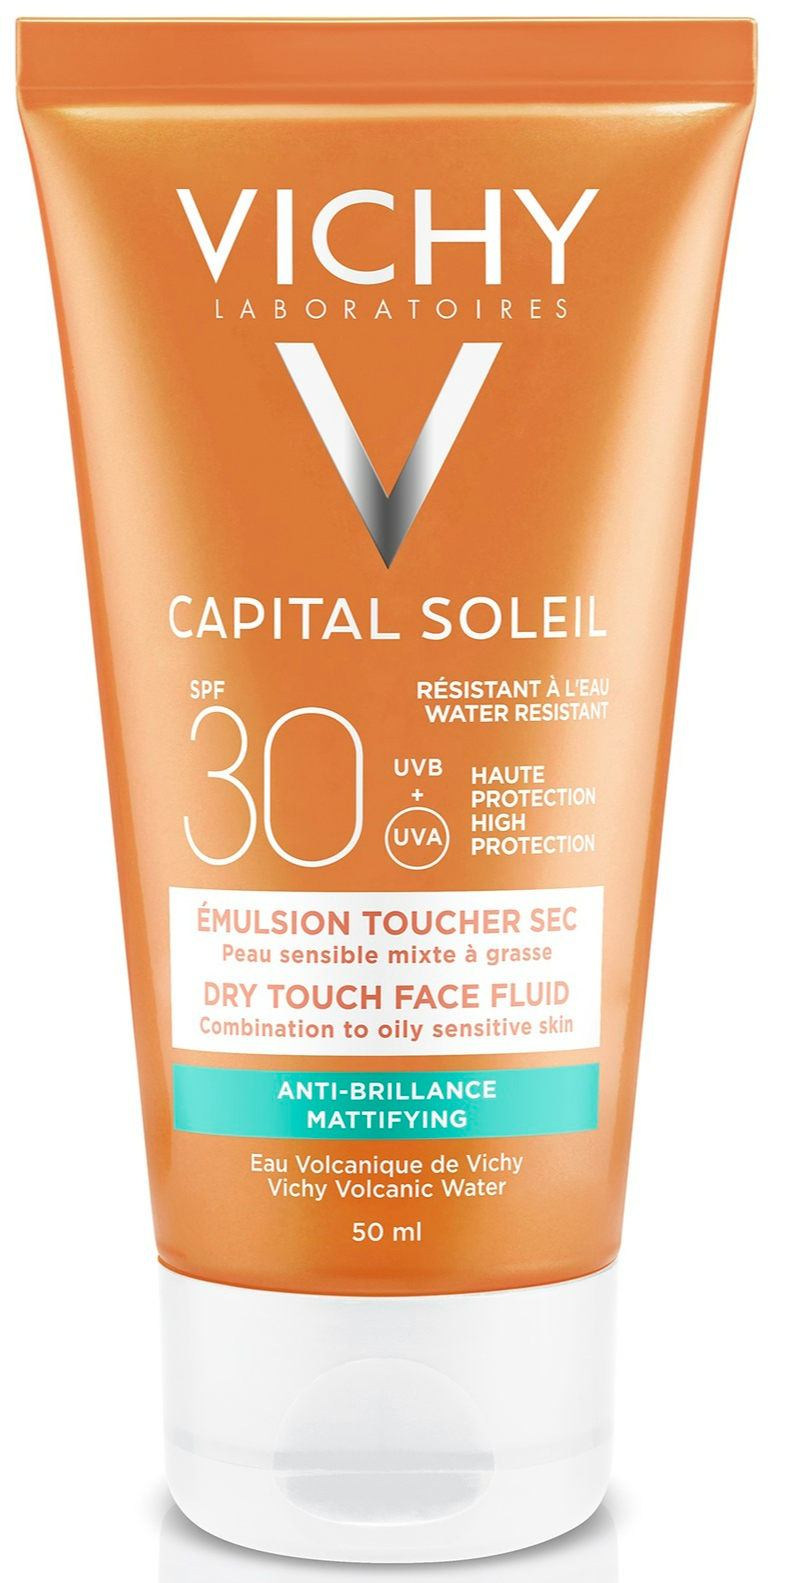 Image of Vichy Capital Soleil Dry Touch Face Fluid Mattifying SPF30 